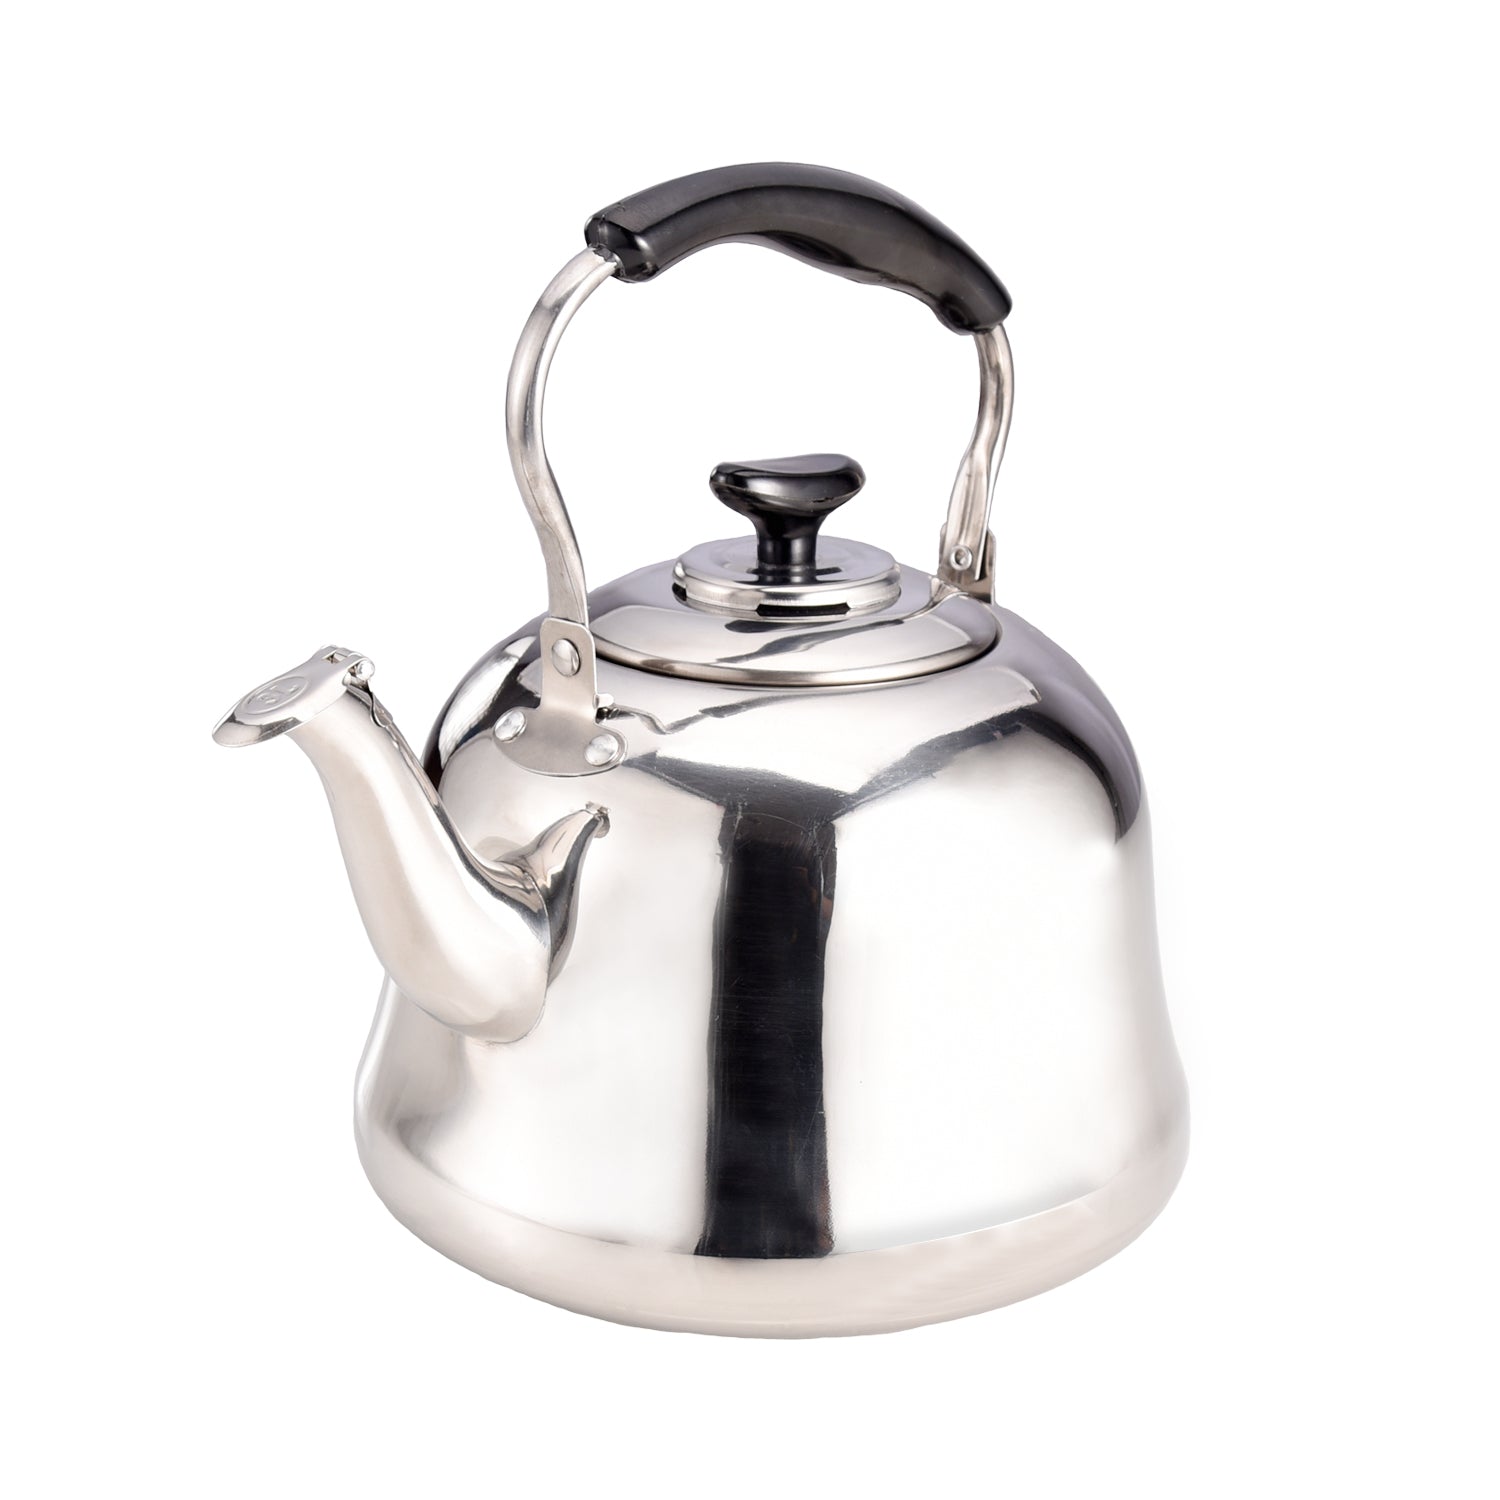 Photos - Electric Kettle 1L Stovetop Classic Stainless Steel Kettle RFU12531